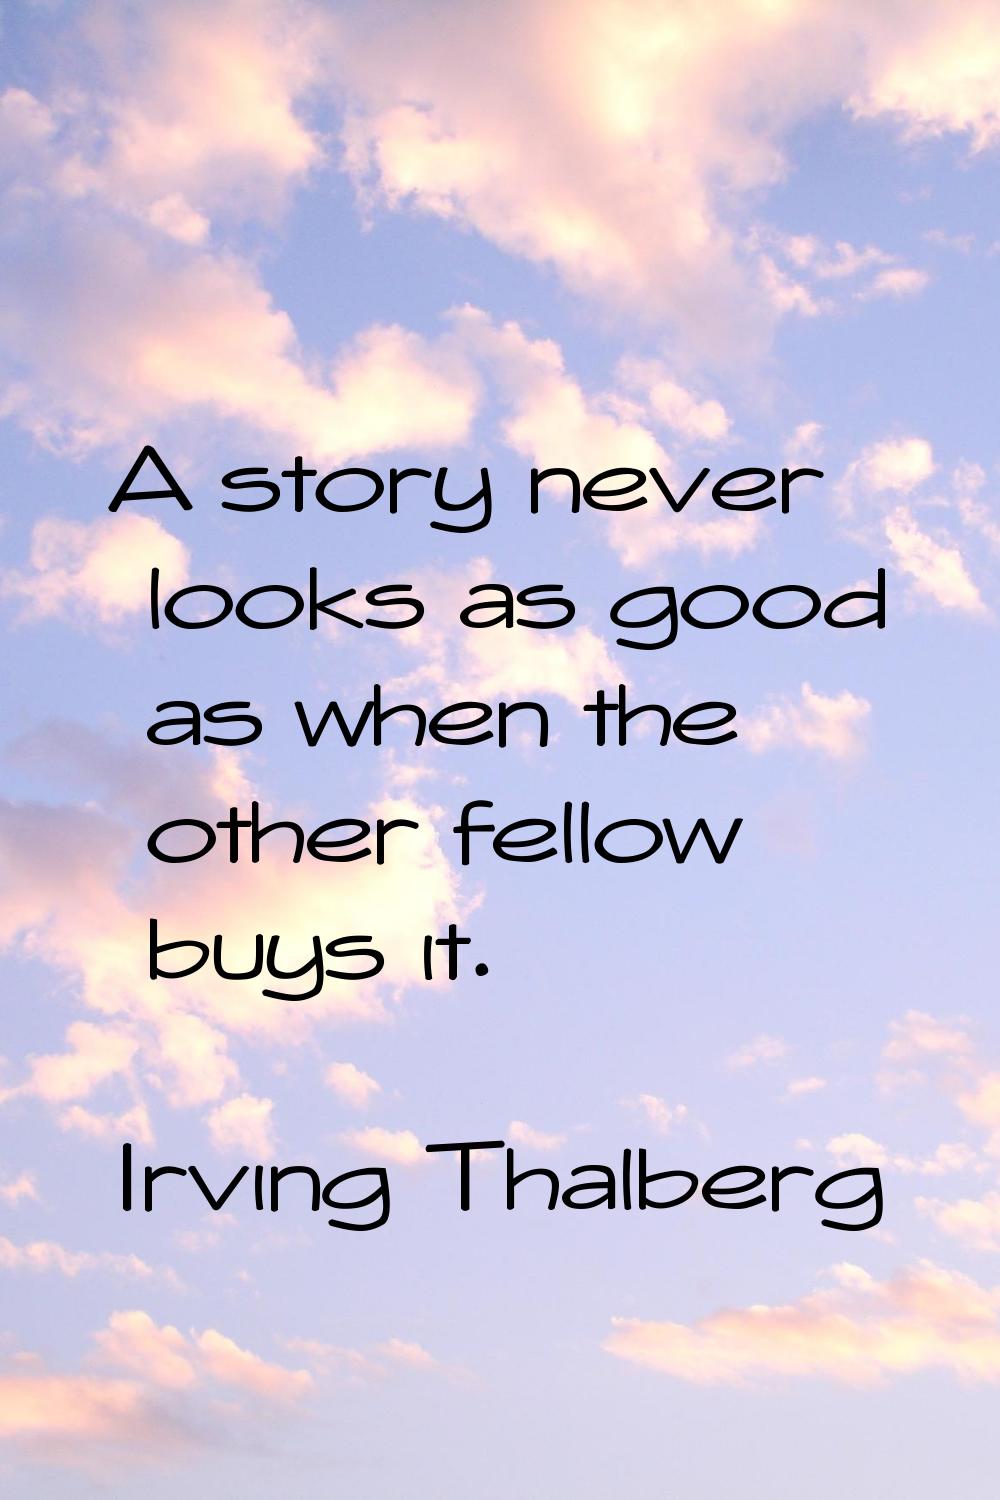 A story never looks as good as when the other fellow buys it.